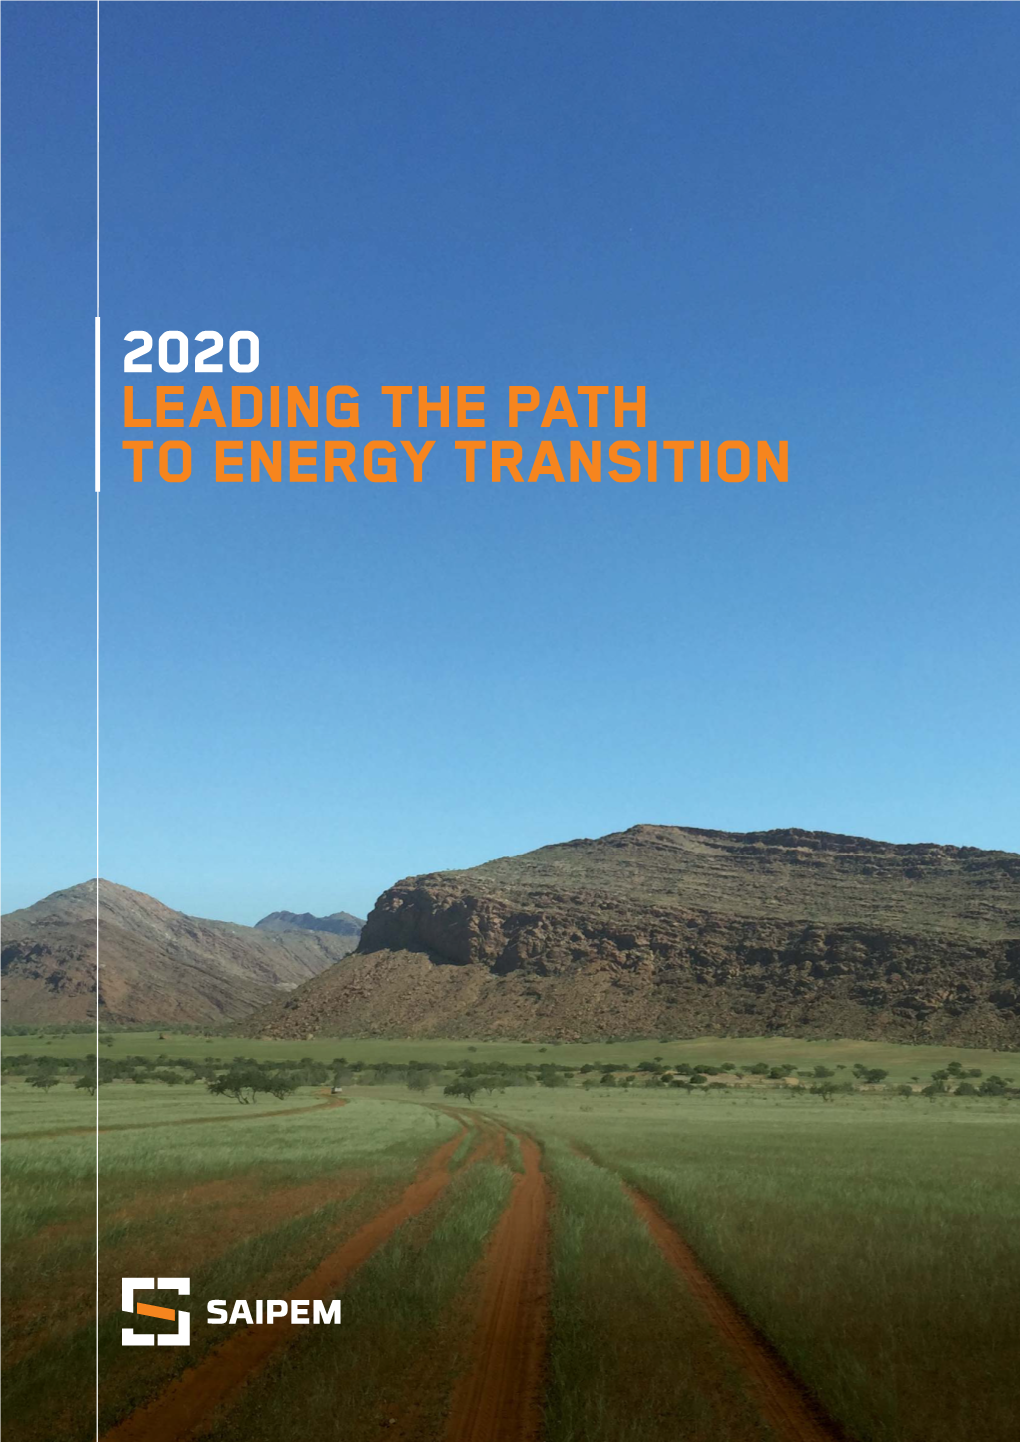 2020 Leading the Path to Energy Transition